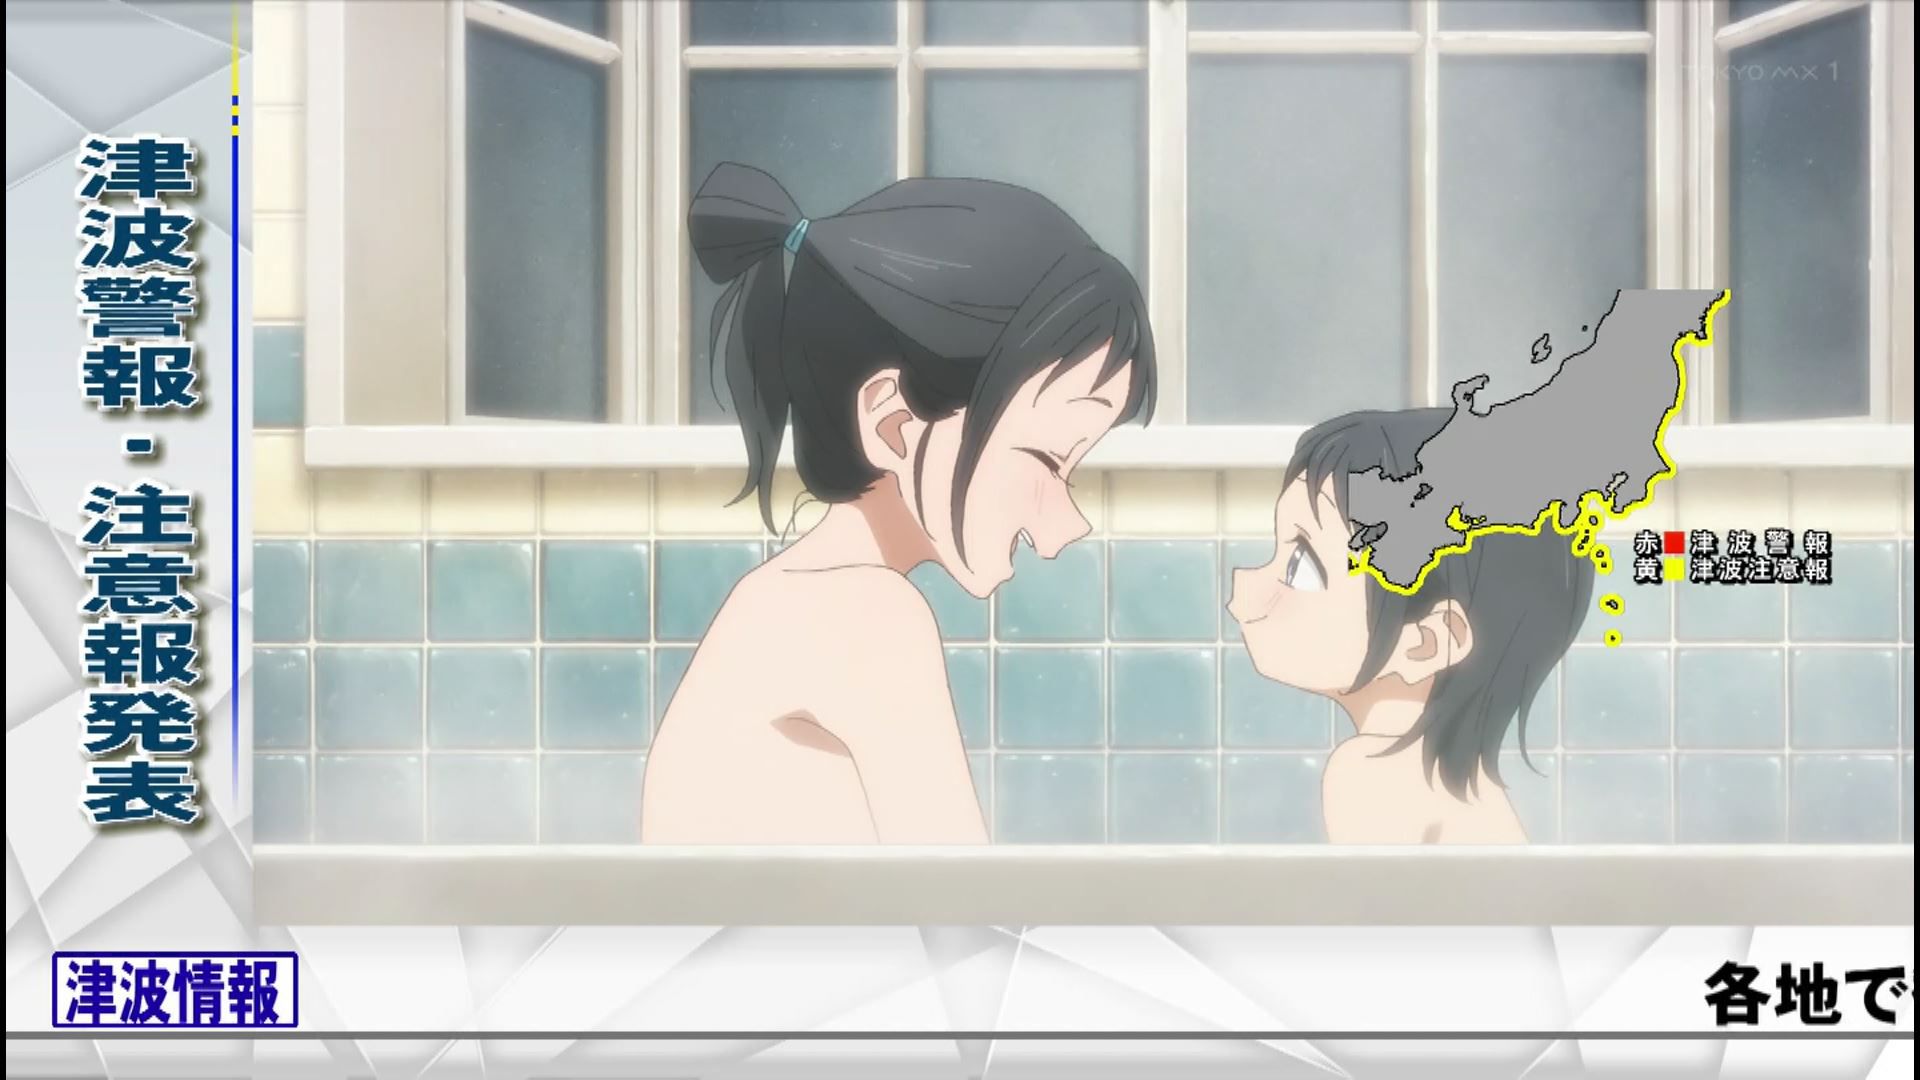 In the anime "Tomorrow-chan's Sailor Suit" episode 2, the girl's erotic bathing scene and the punchy scene 27